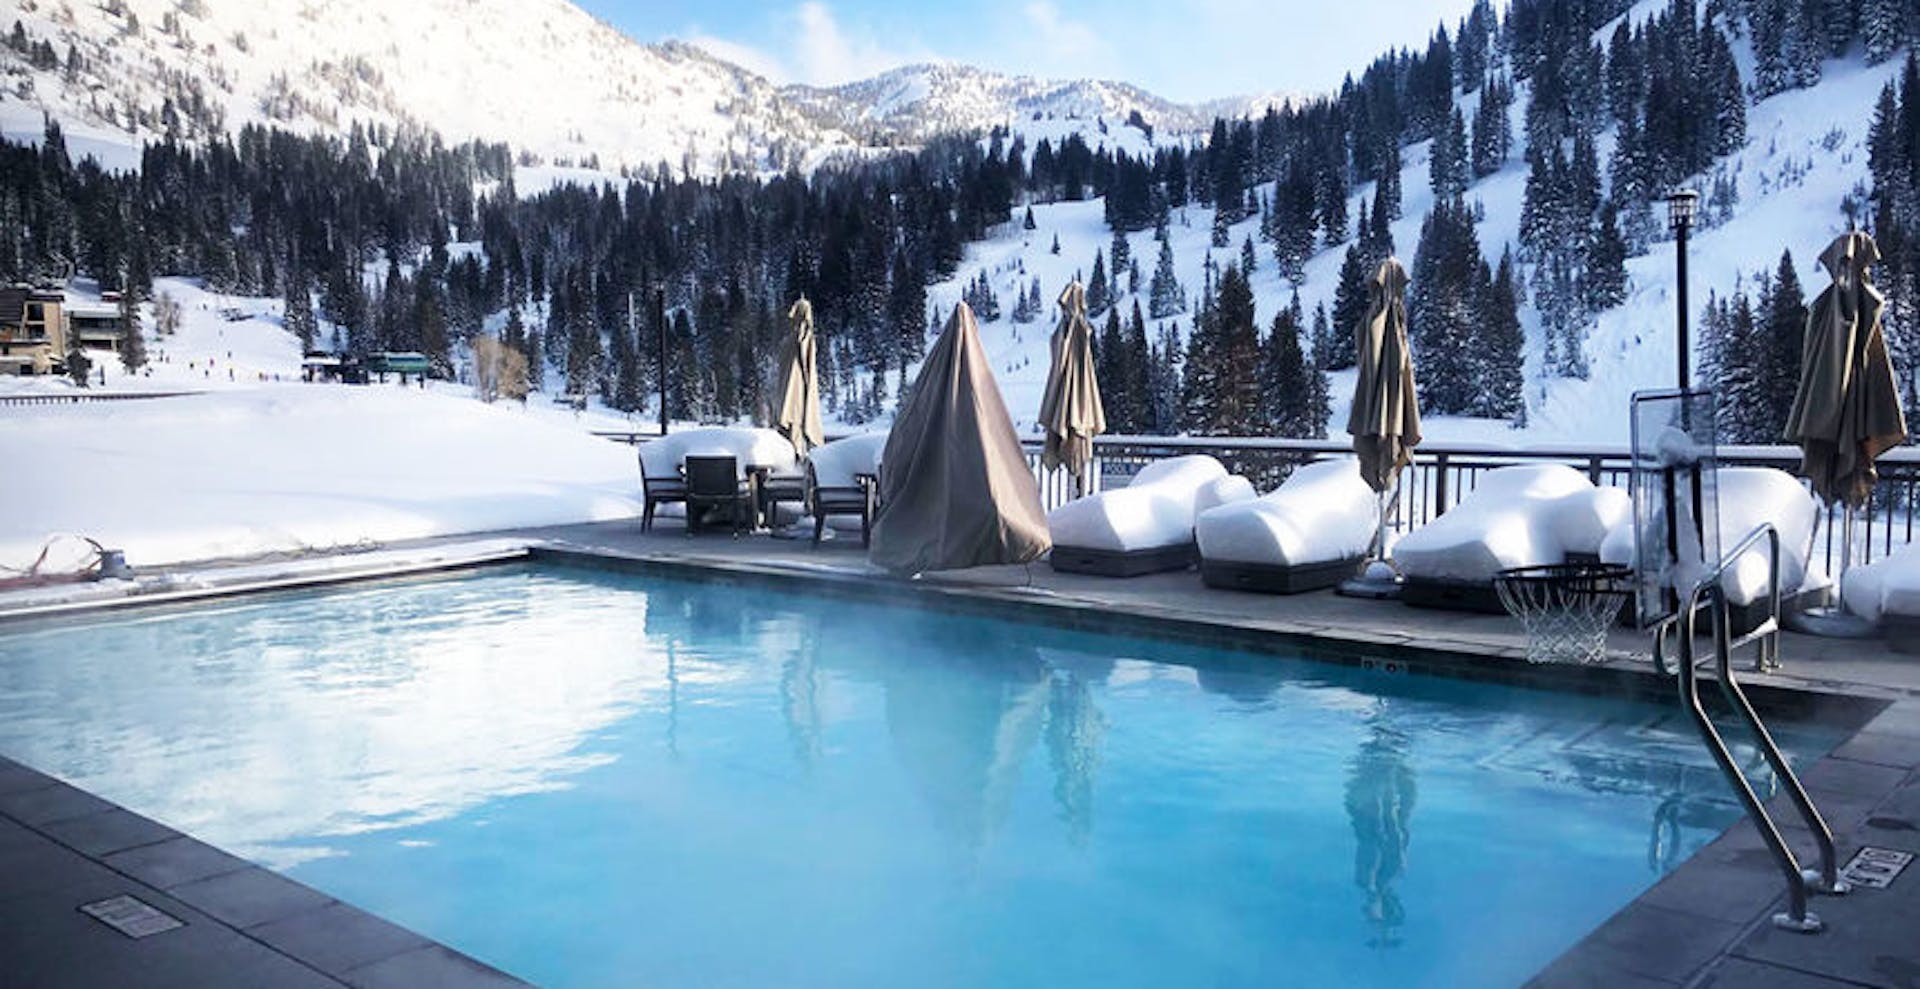 Outdoor Jacuzzi at The Snowpine Lodge